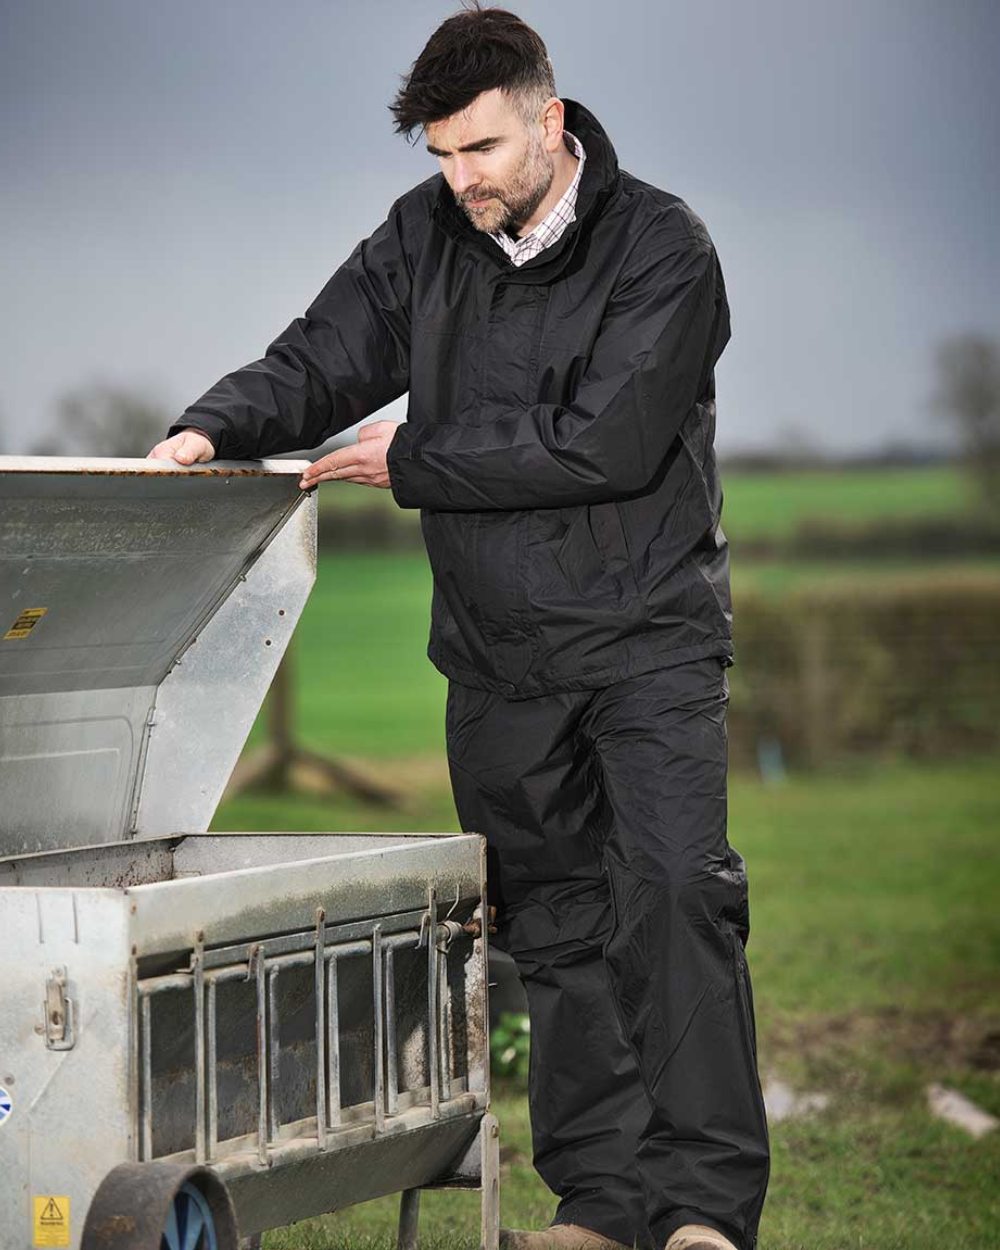 Black Coloured Fort Rutland Waterproof Over Trousers On A Farm Background